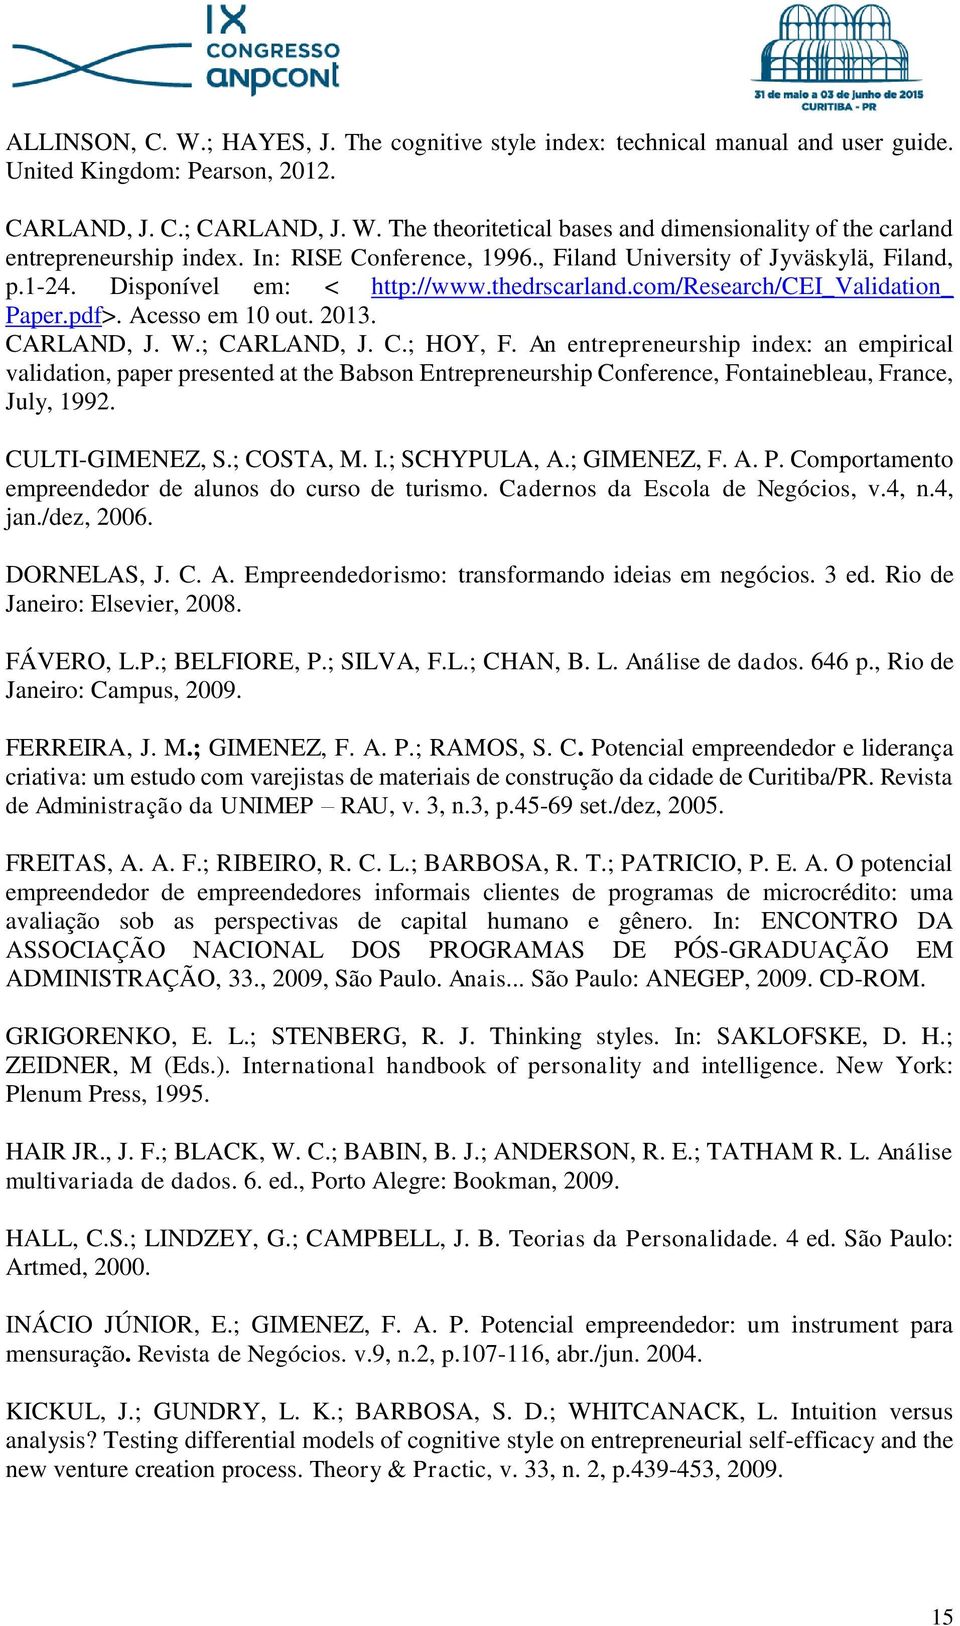 ; CARLAND, J. C.; HOY, F. An entrepreneurship index: an empirical validation, paper presented at the Babson Entrepreneurship Conference, Fontainebleau, France, July, 1992. CULTI-GIMENEZ, S.; COSTA, M.